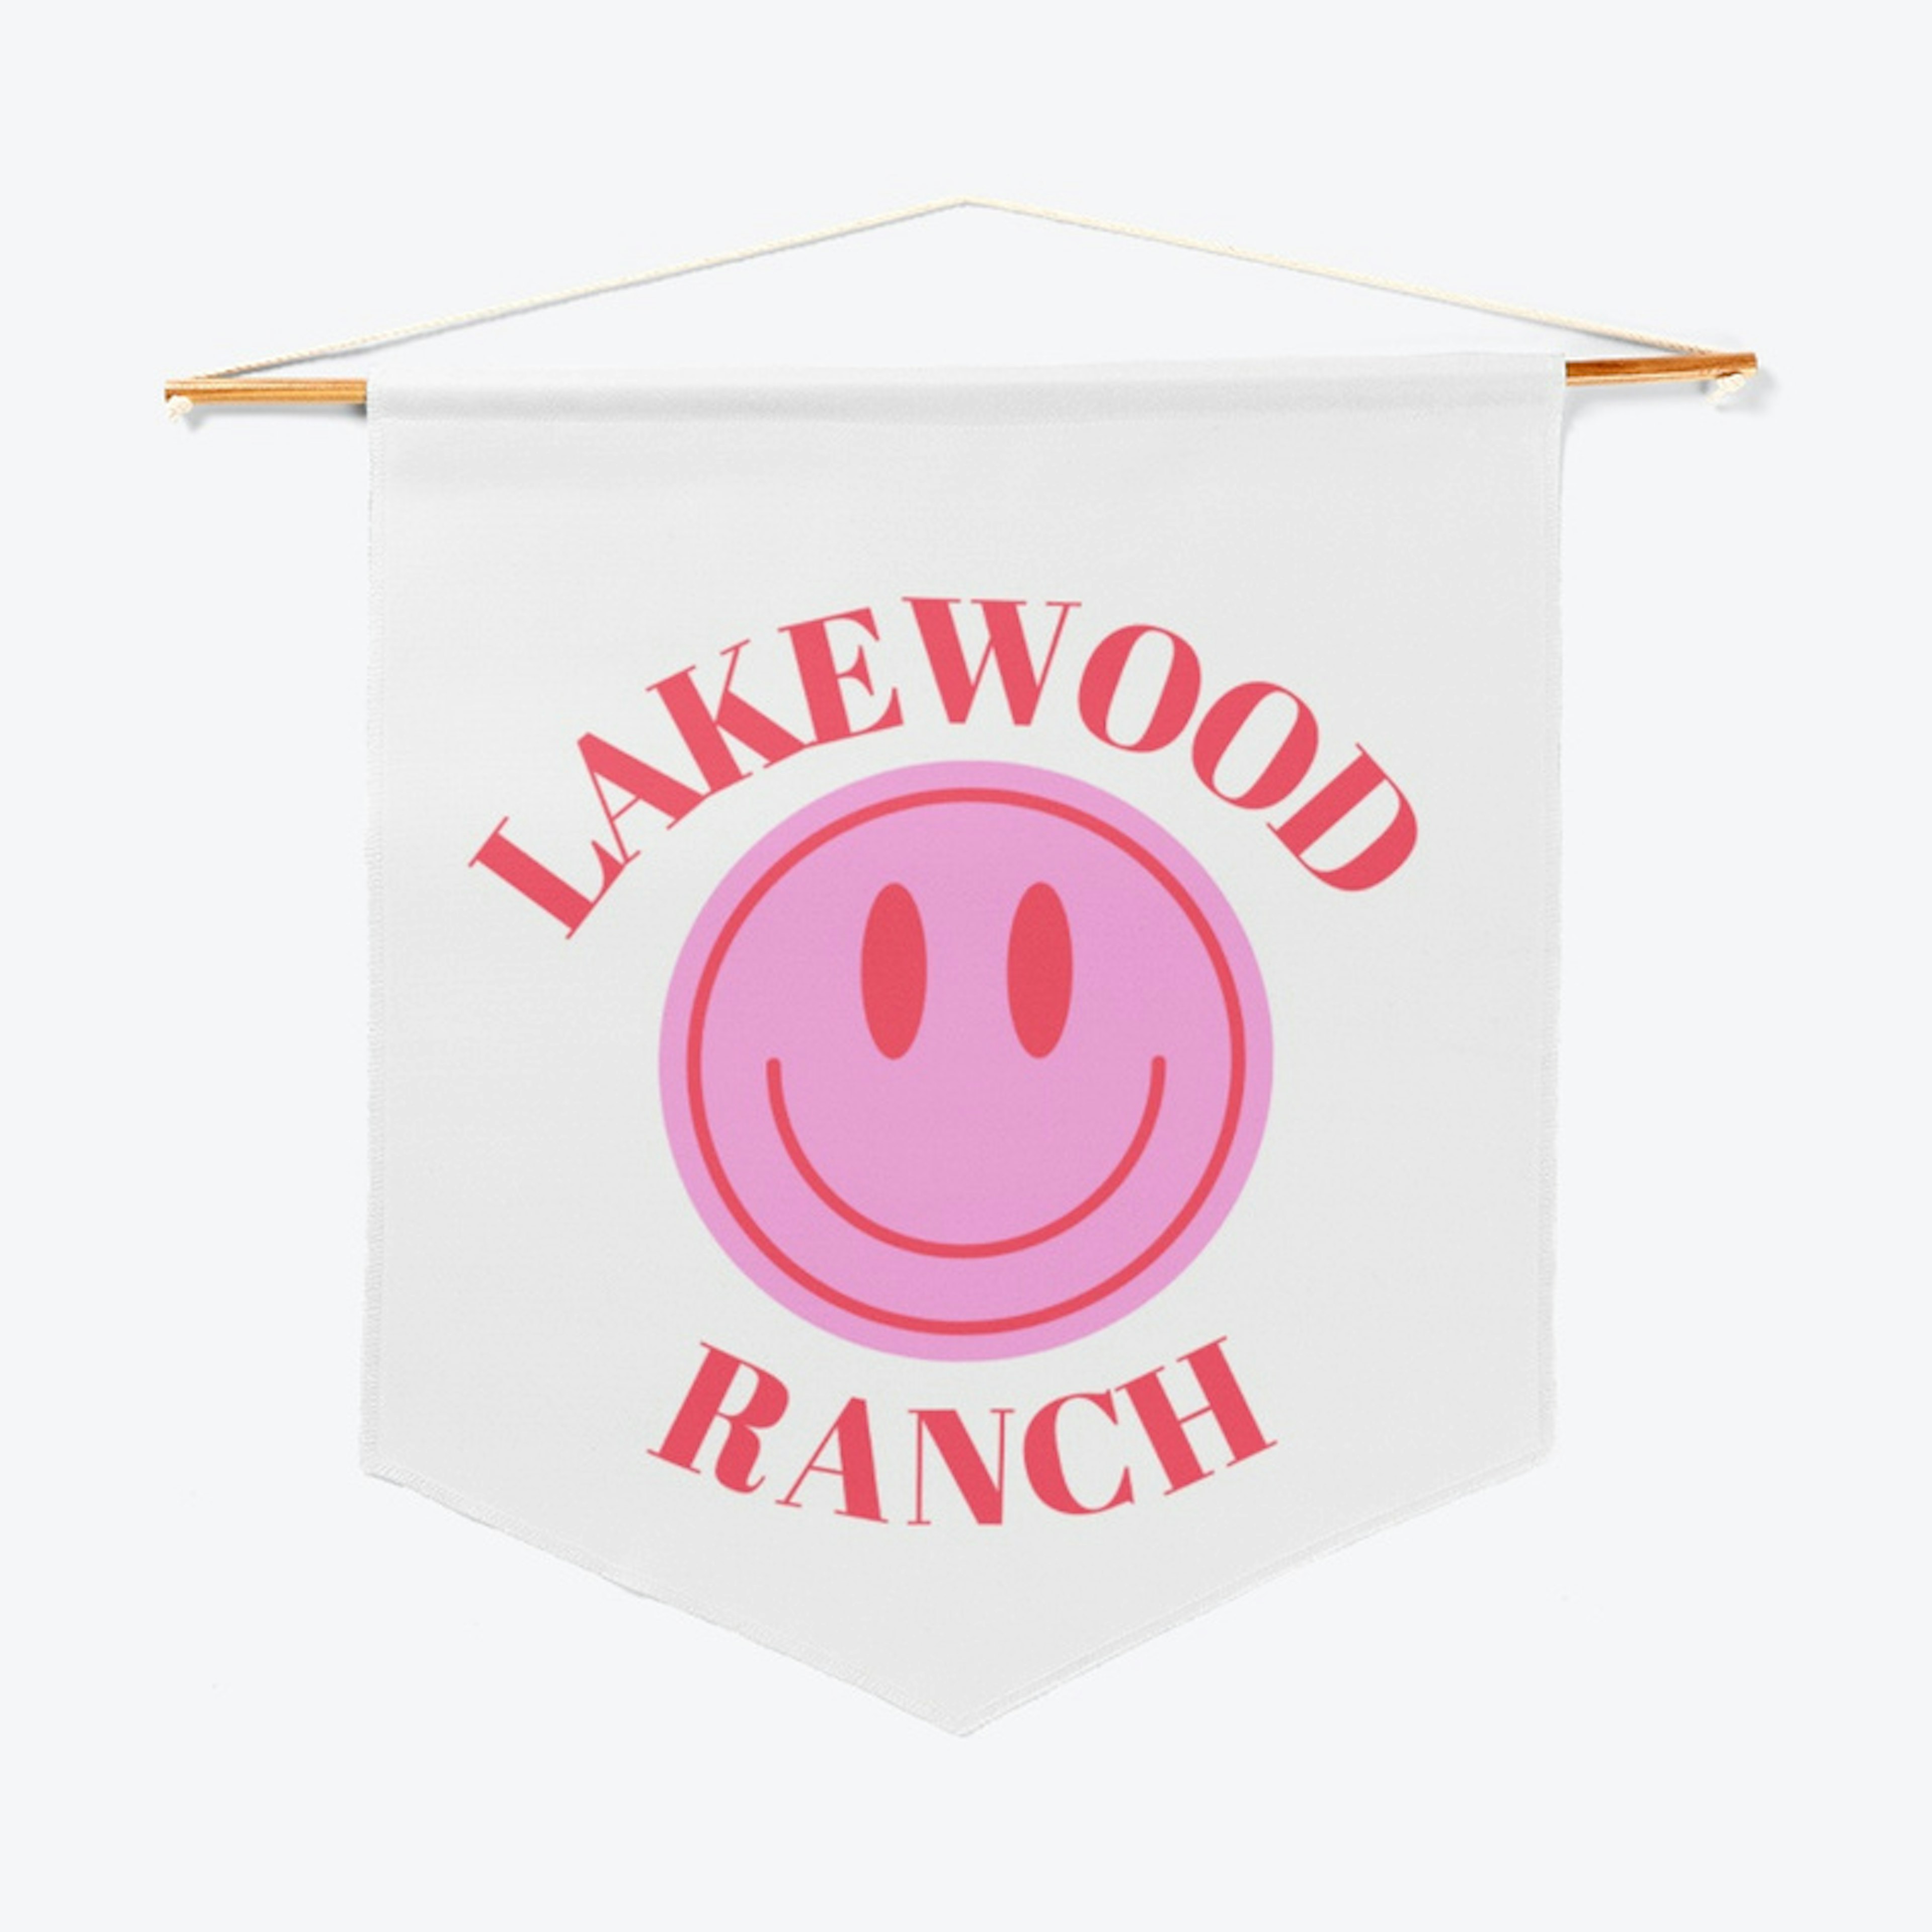 Lakewood Ranch Smiley Collection